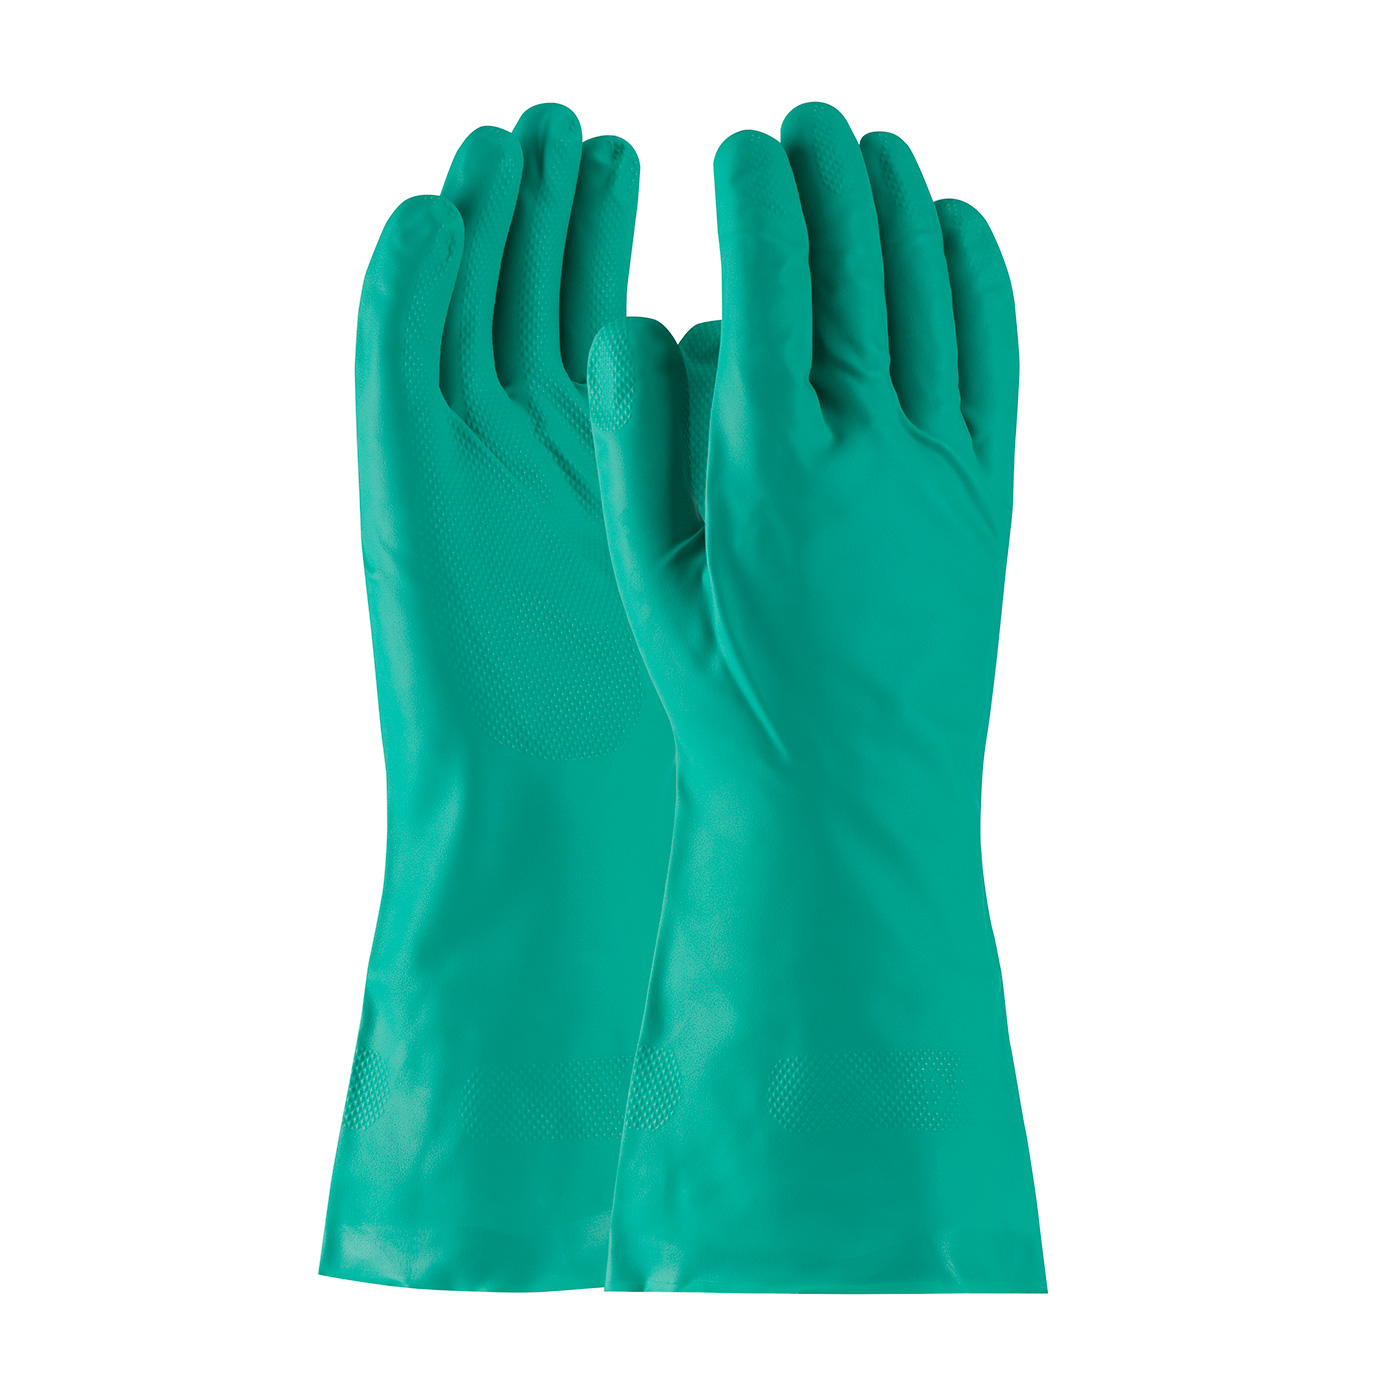 PIP 50-N140G/XL Assurance Unsupported Nitrile, Unlined with Raised Diamond Grip - 15 Mil - X-Large PID-50 N140G XL